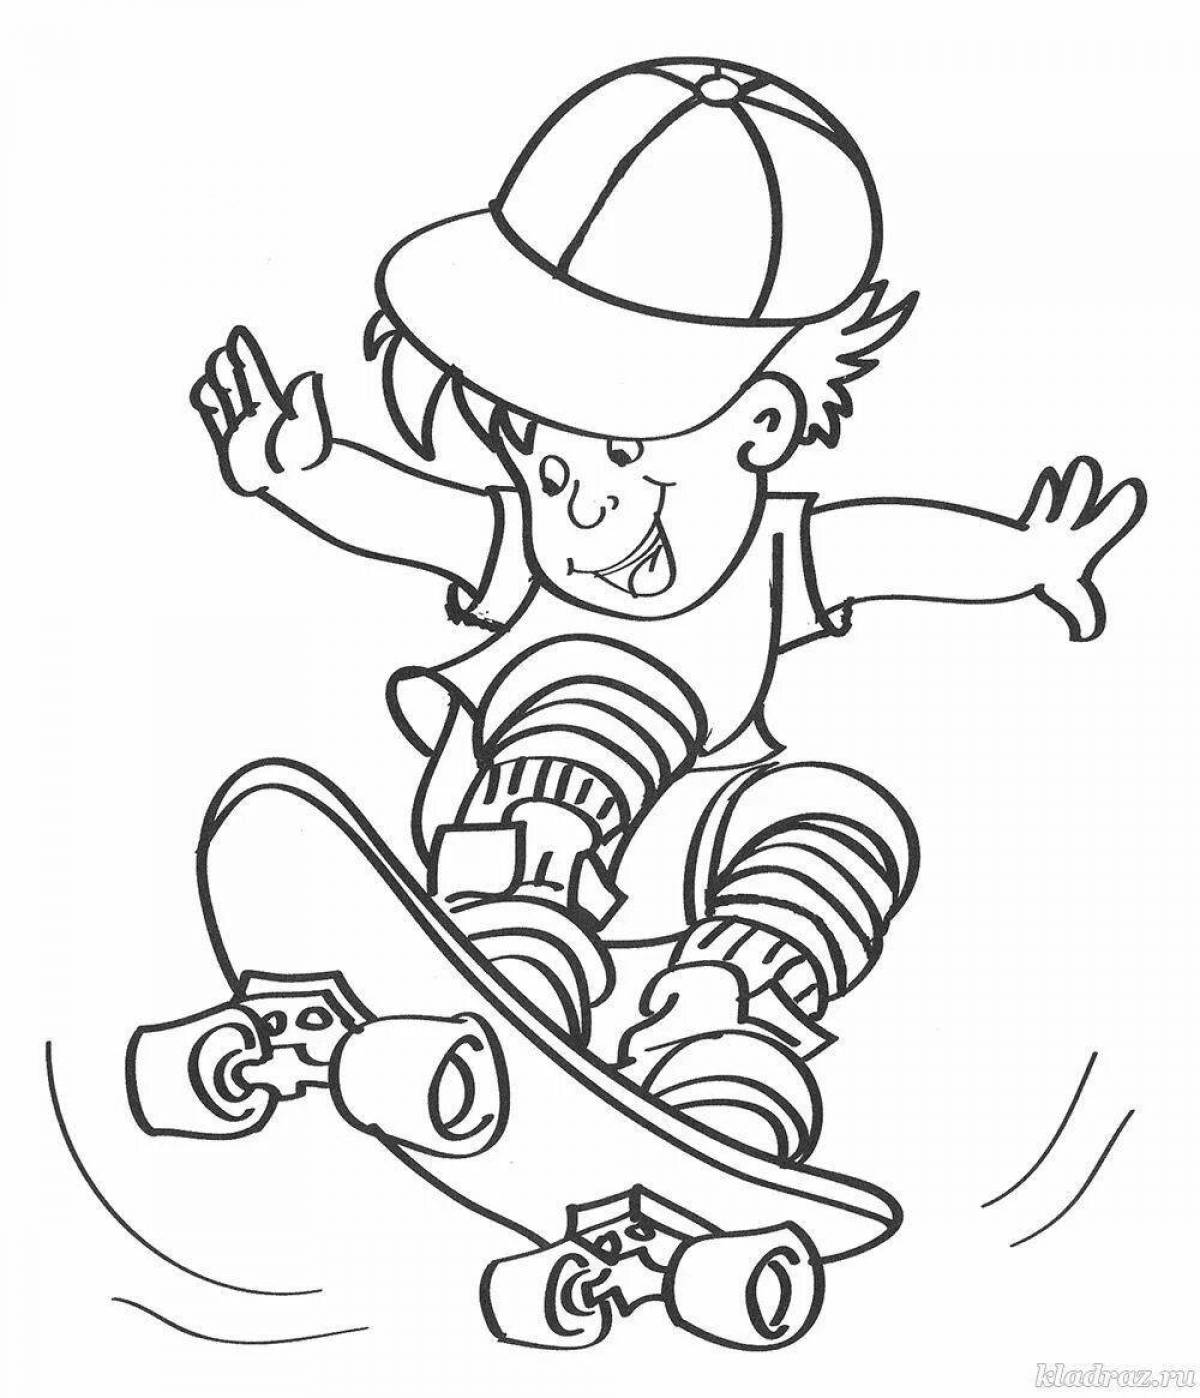 A fun sports coloring book for kids 4-5 years old